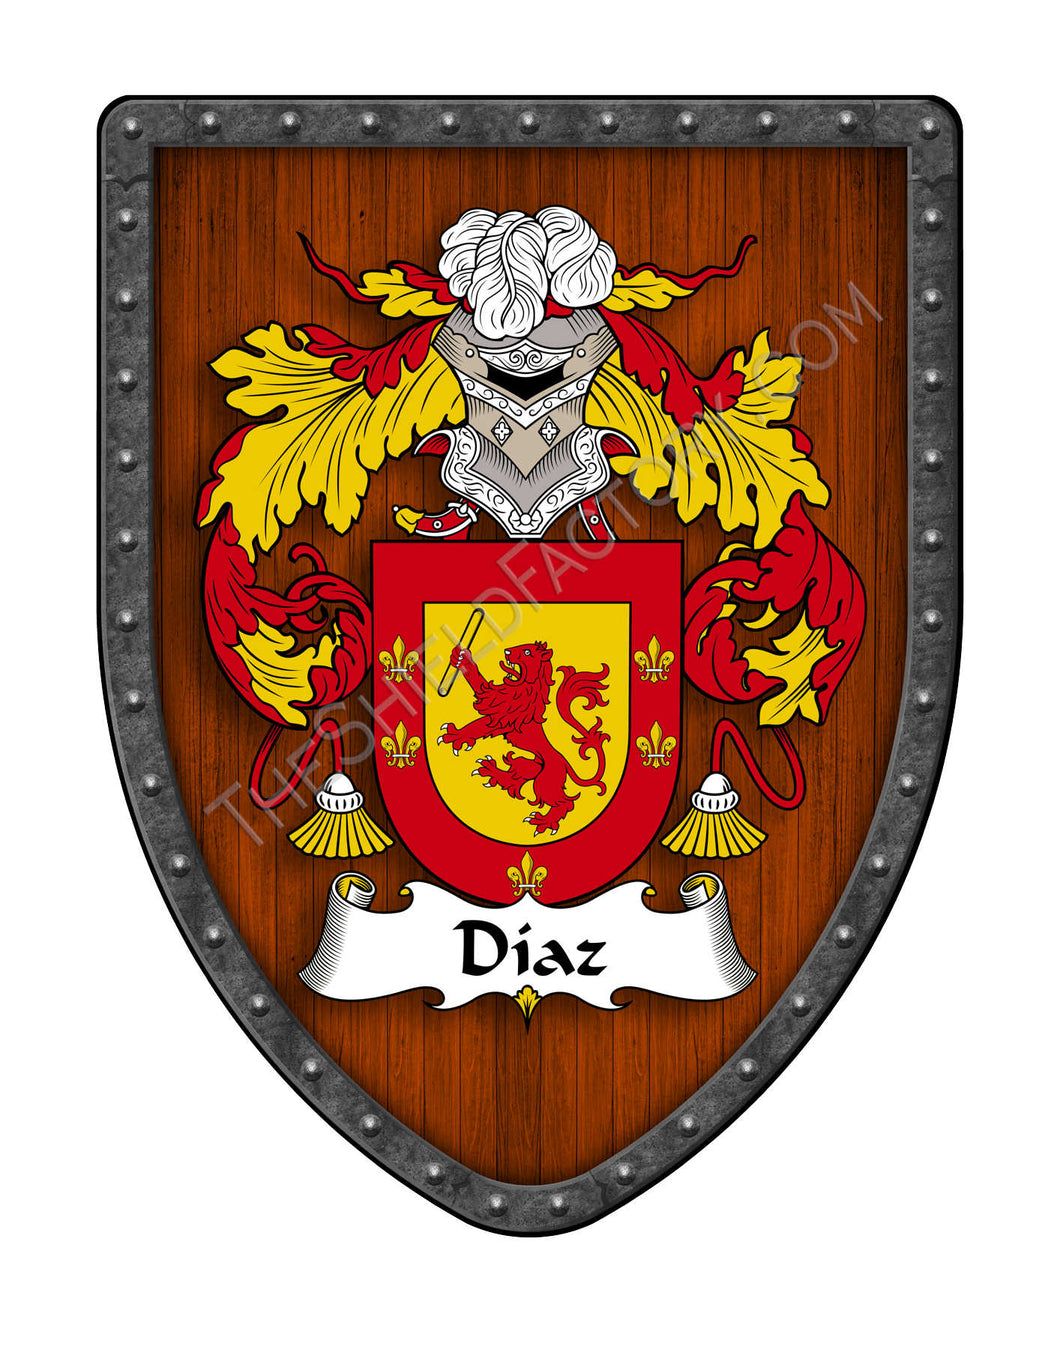 Diaz I Coat of Arms Shield Family Crest